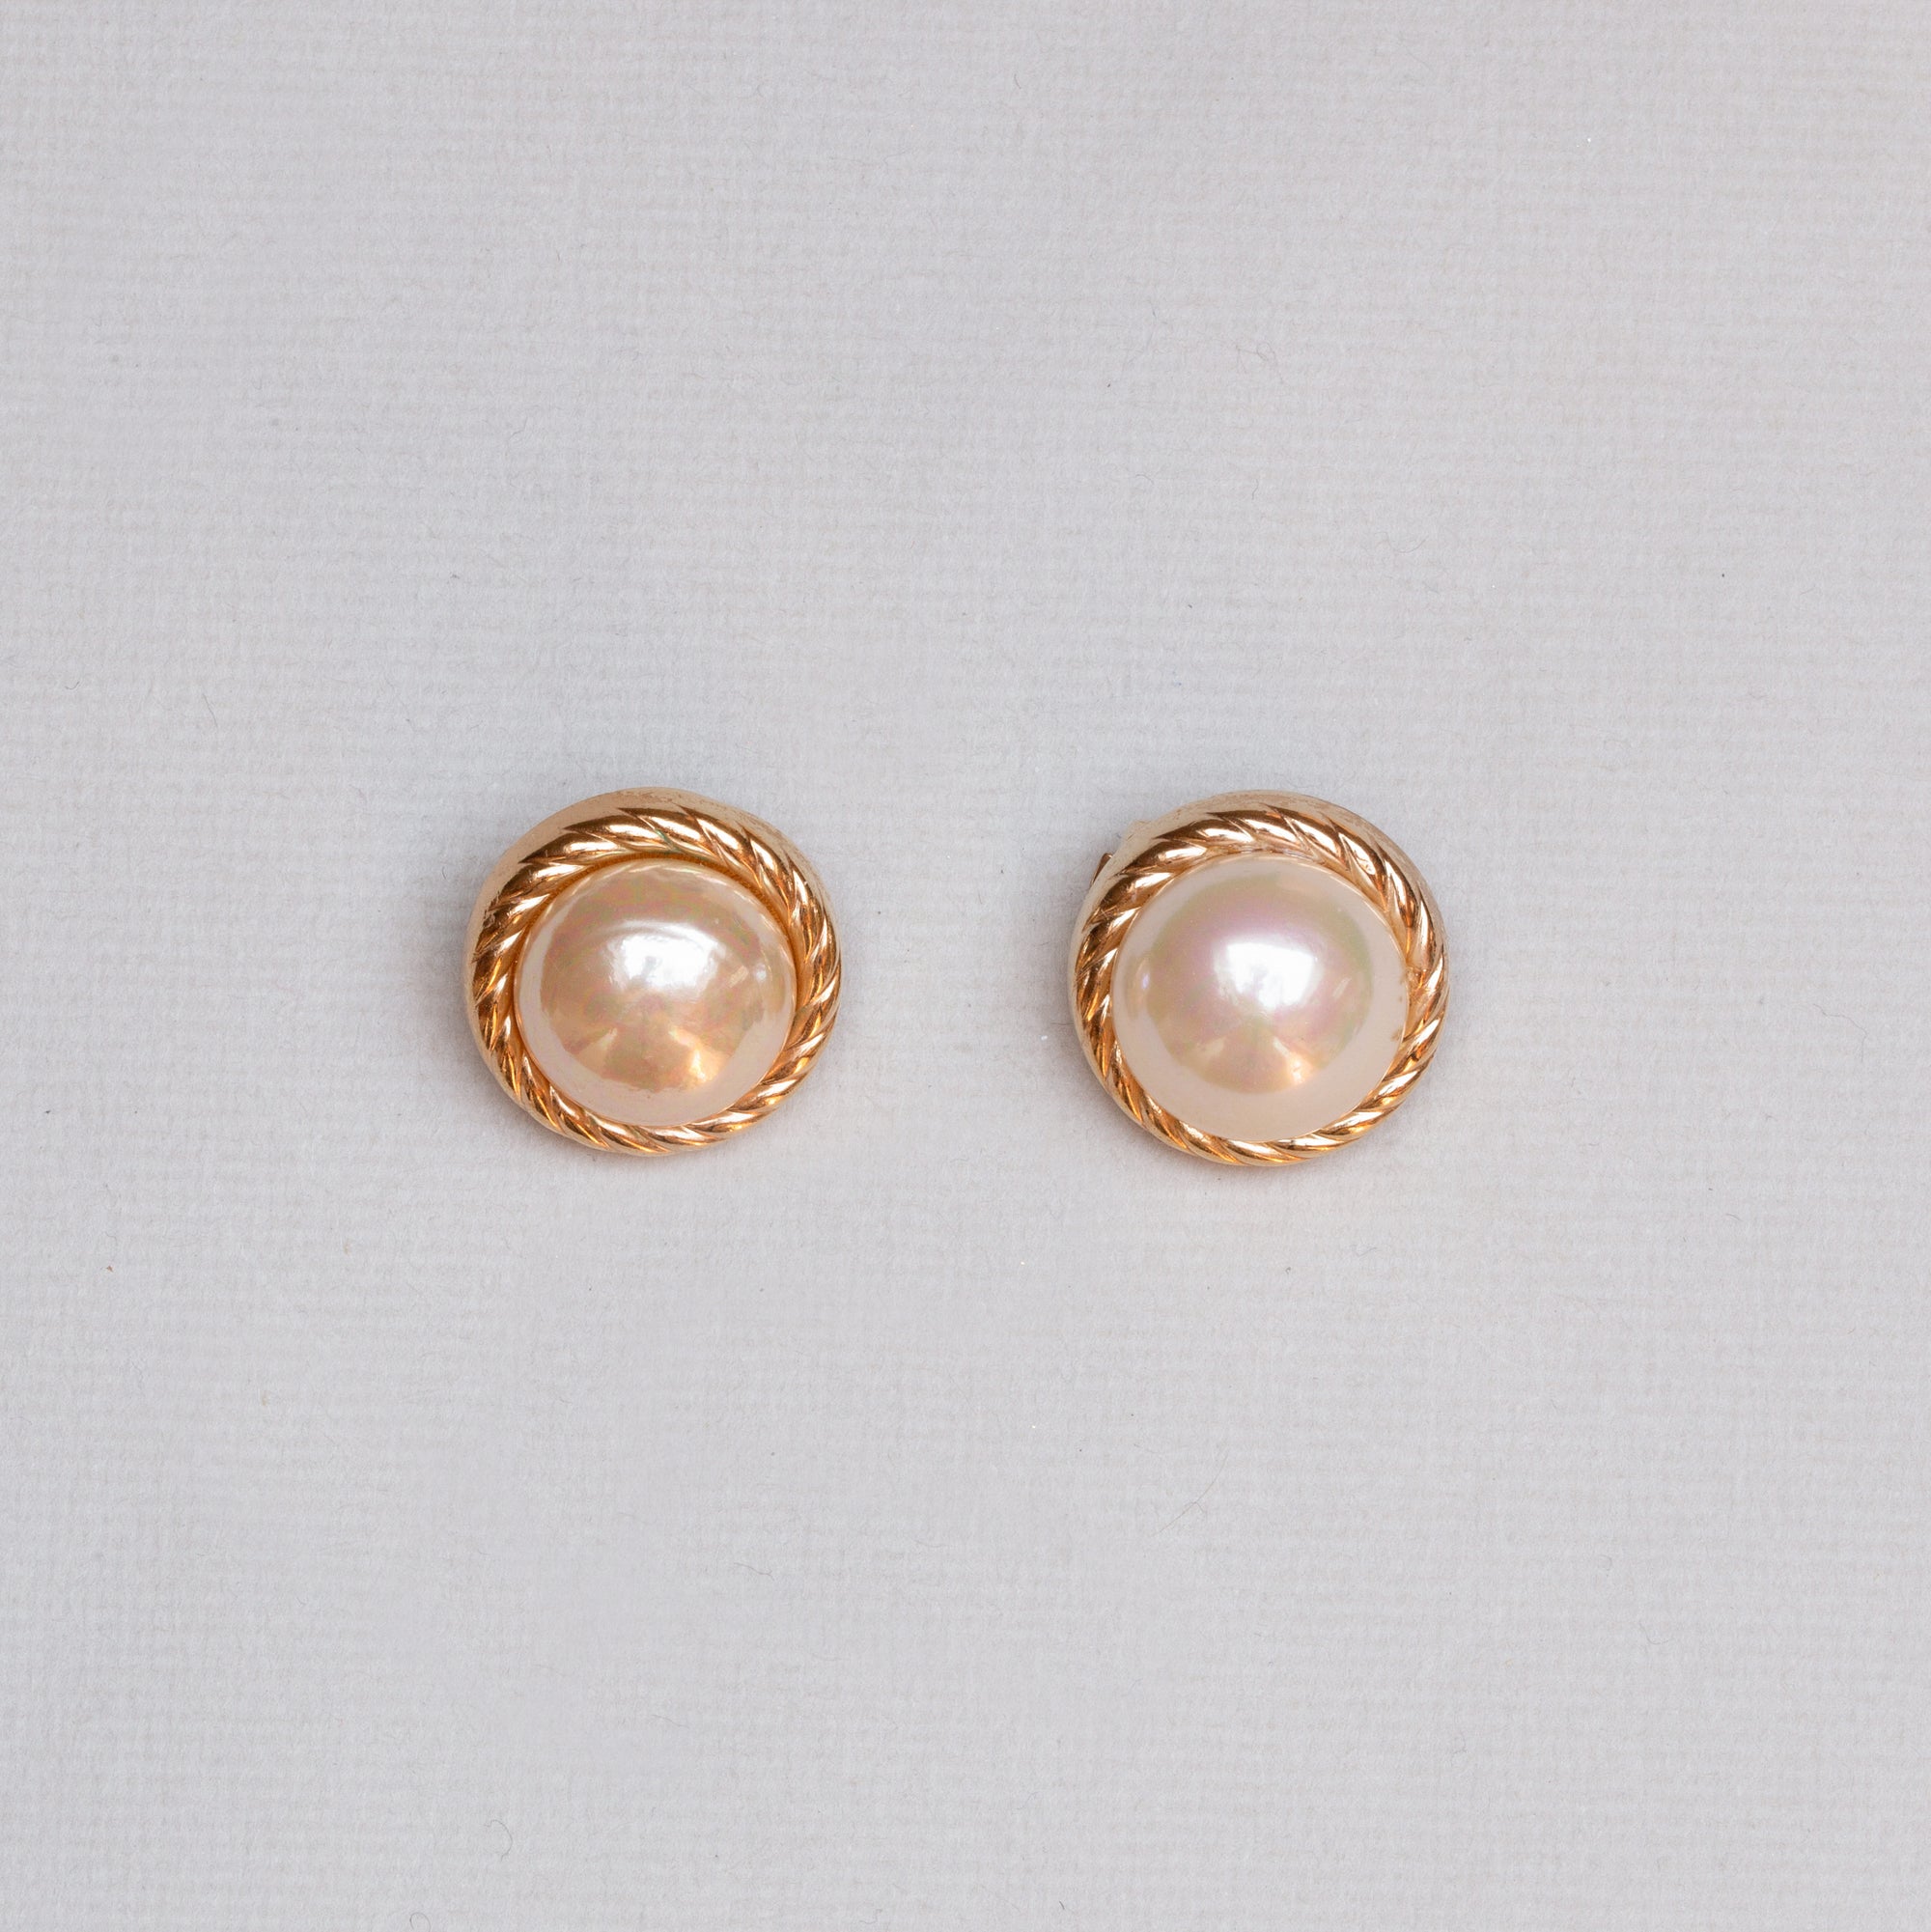 Vintage Christian Dior Clip-on Earrings with Pearls